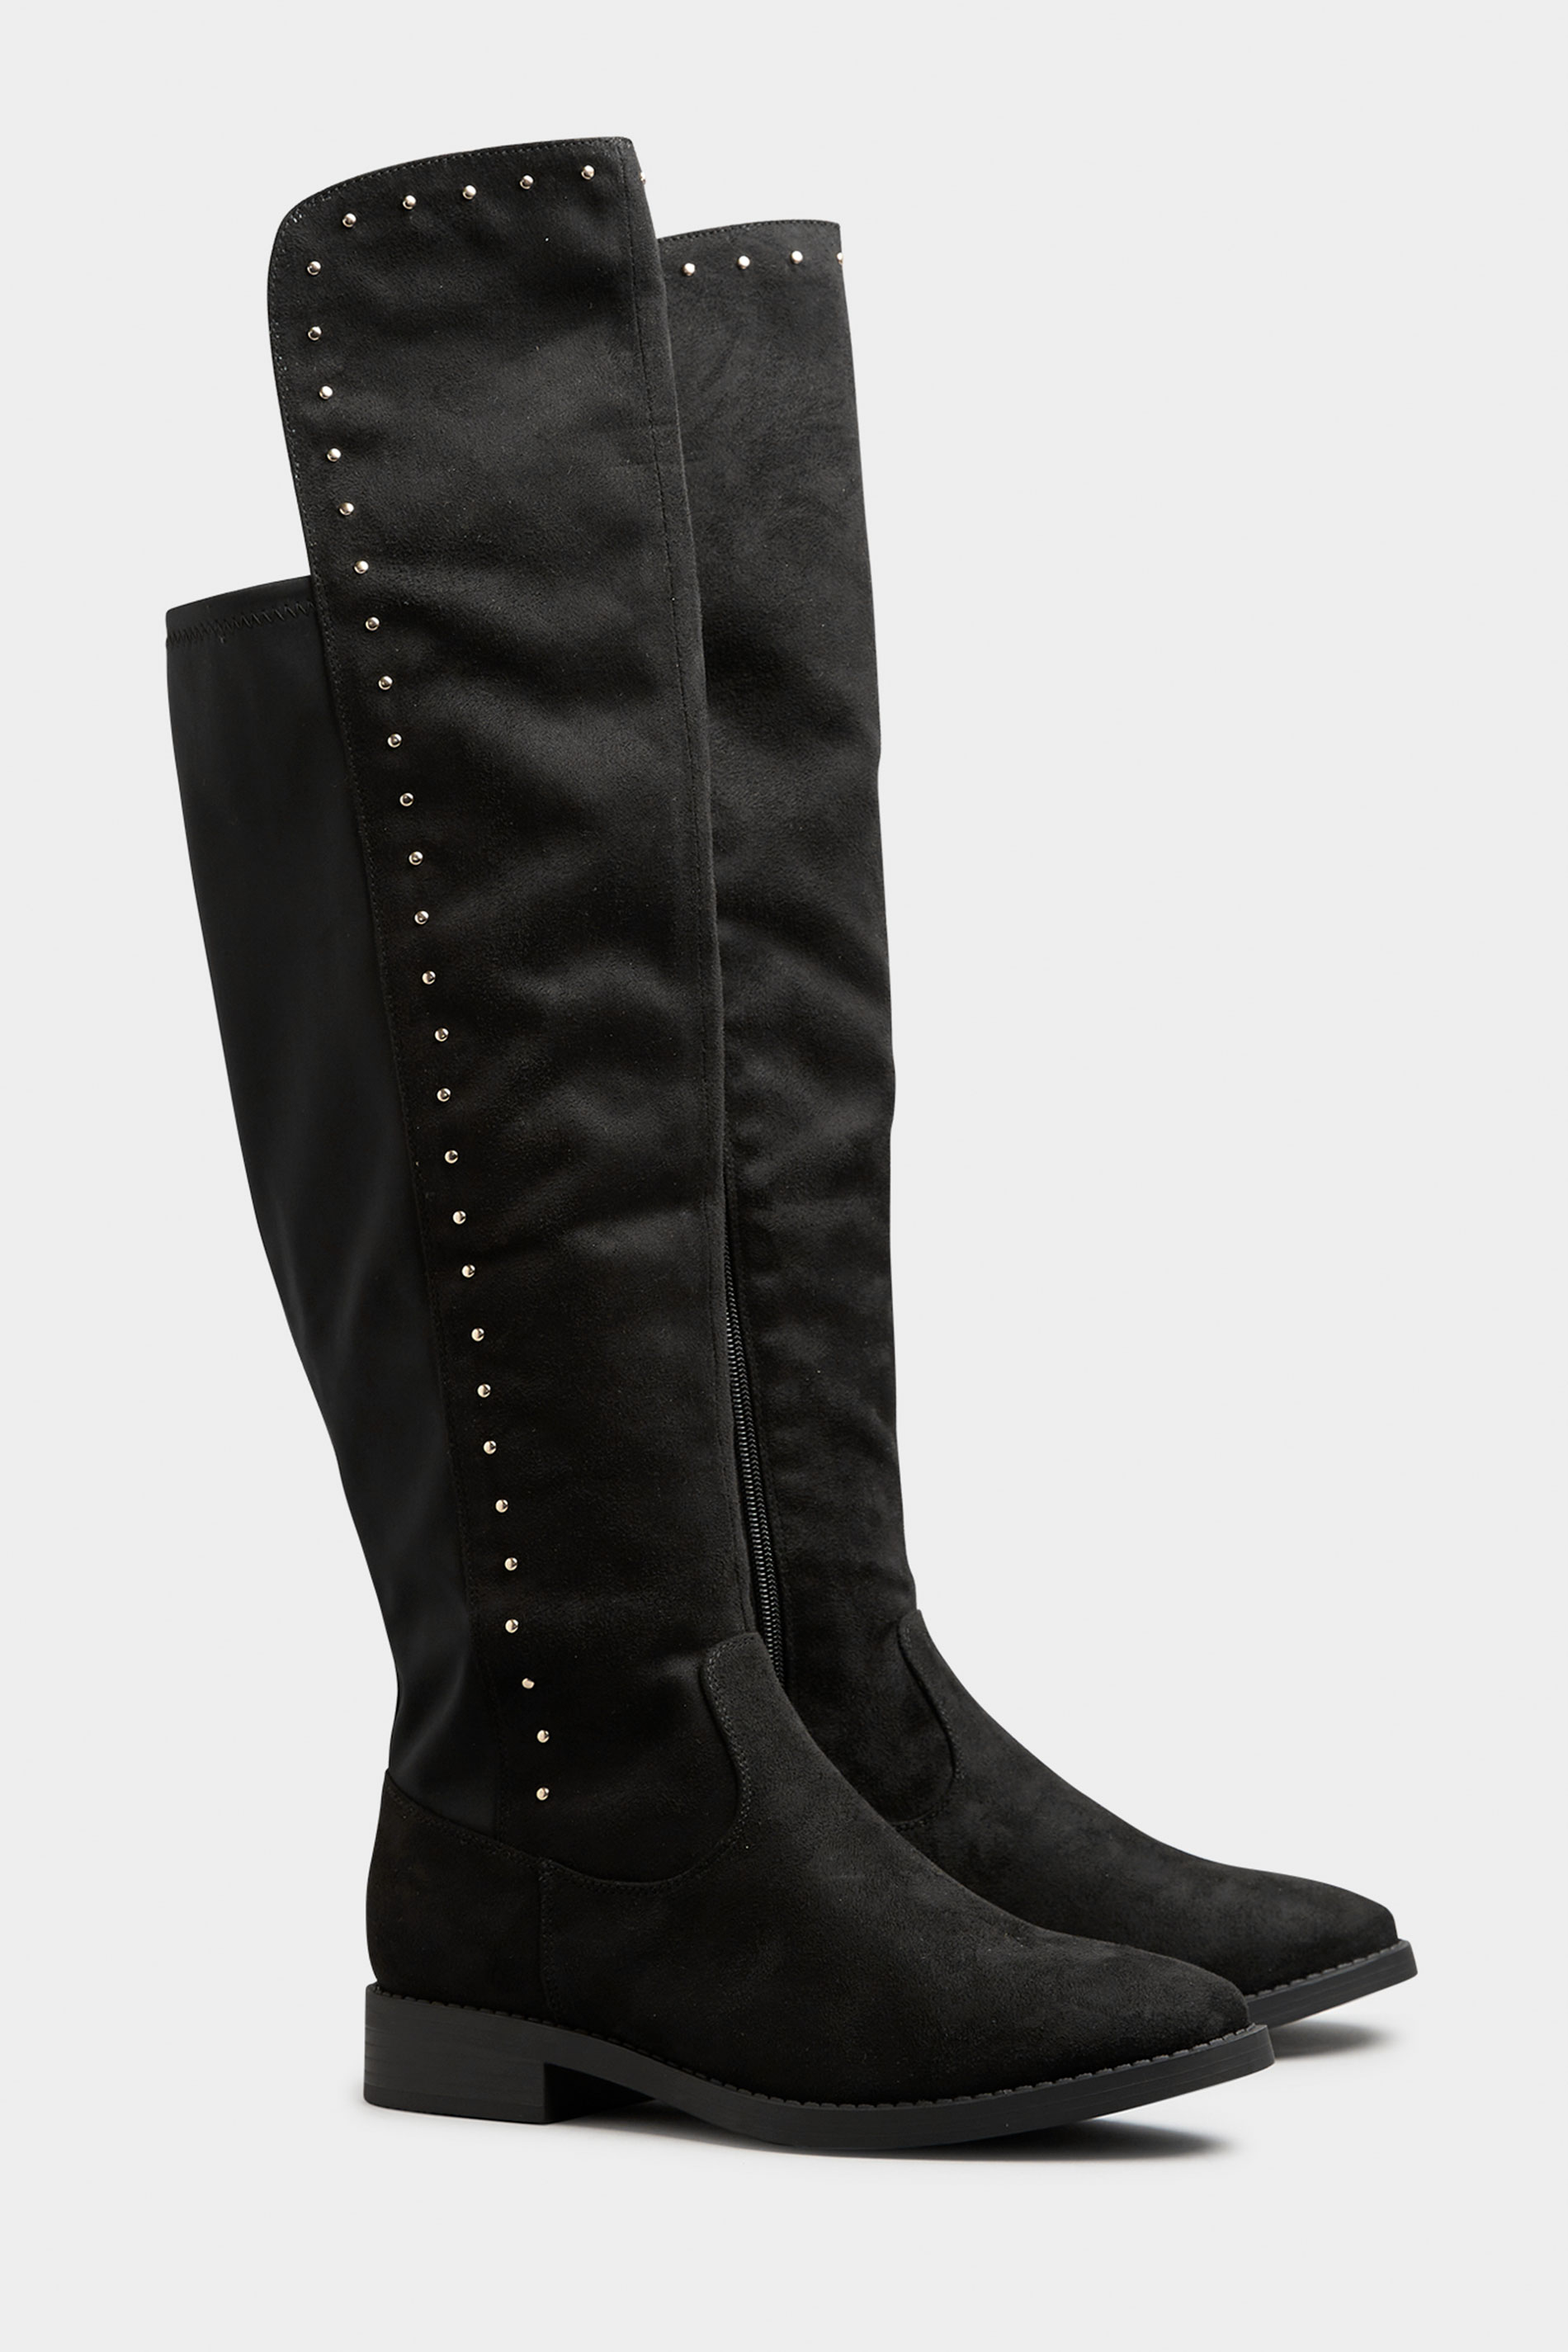 LIMITED COLLECTION Black Stud Over The Knee Boots In Wide E Fit & Extra Wide Fit | Yours Clothing 2